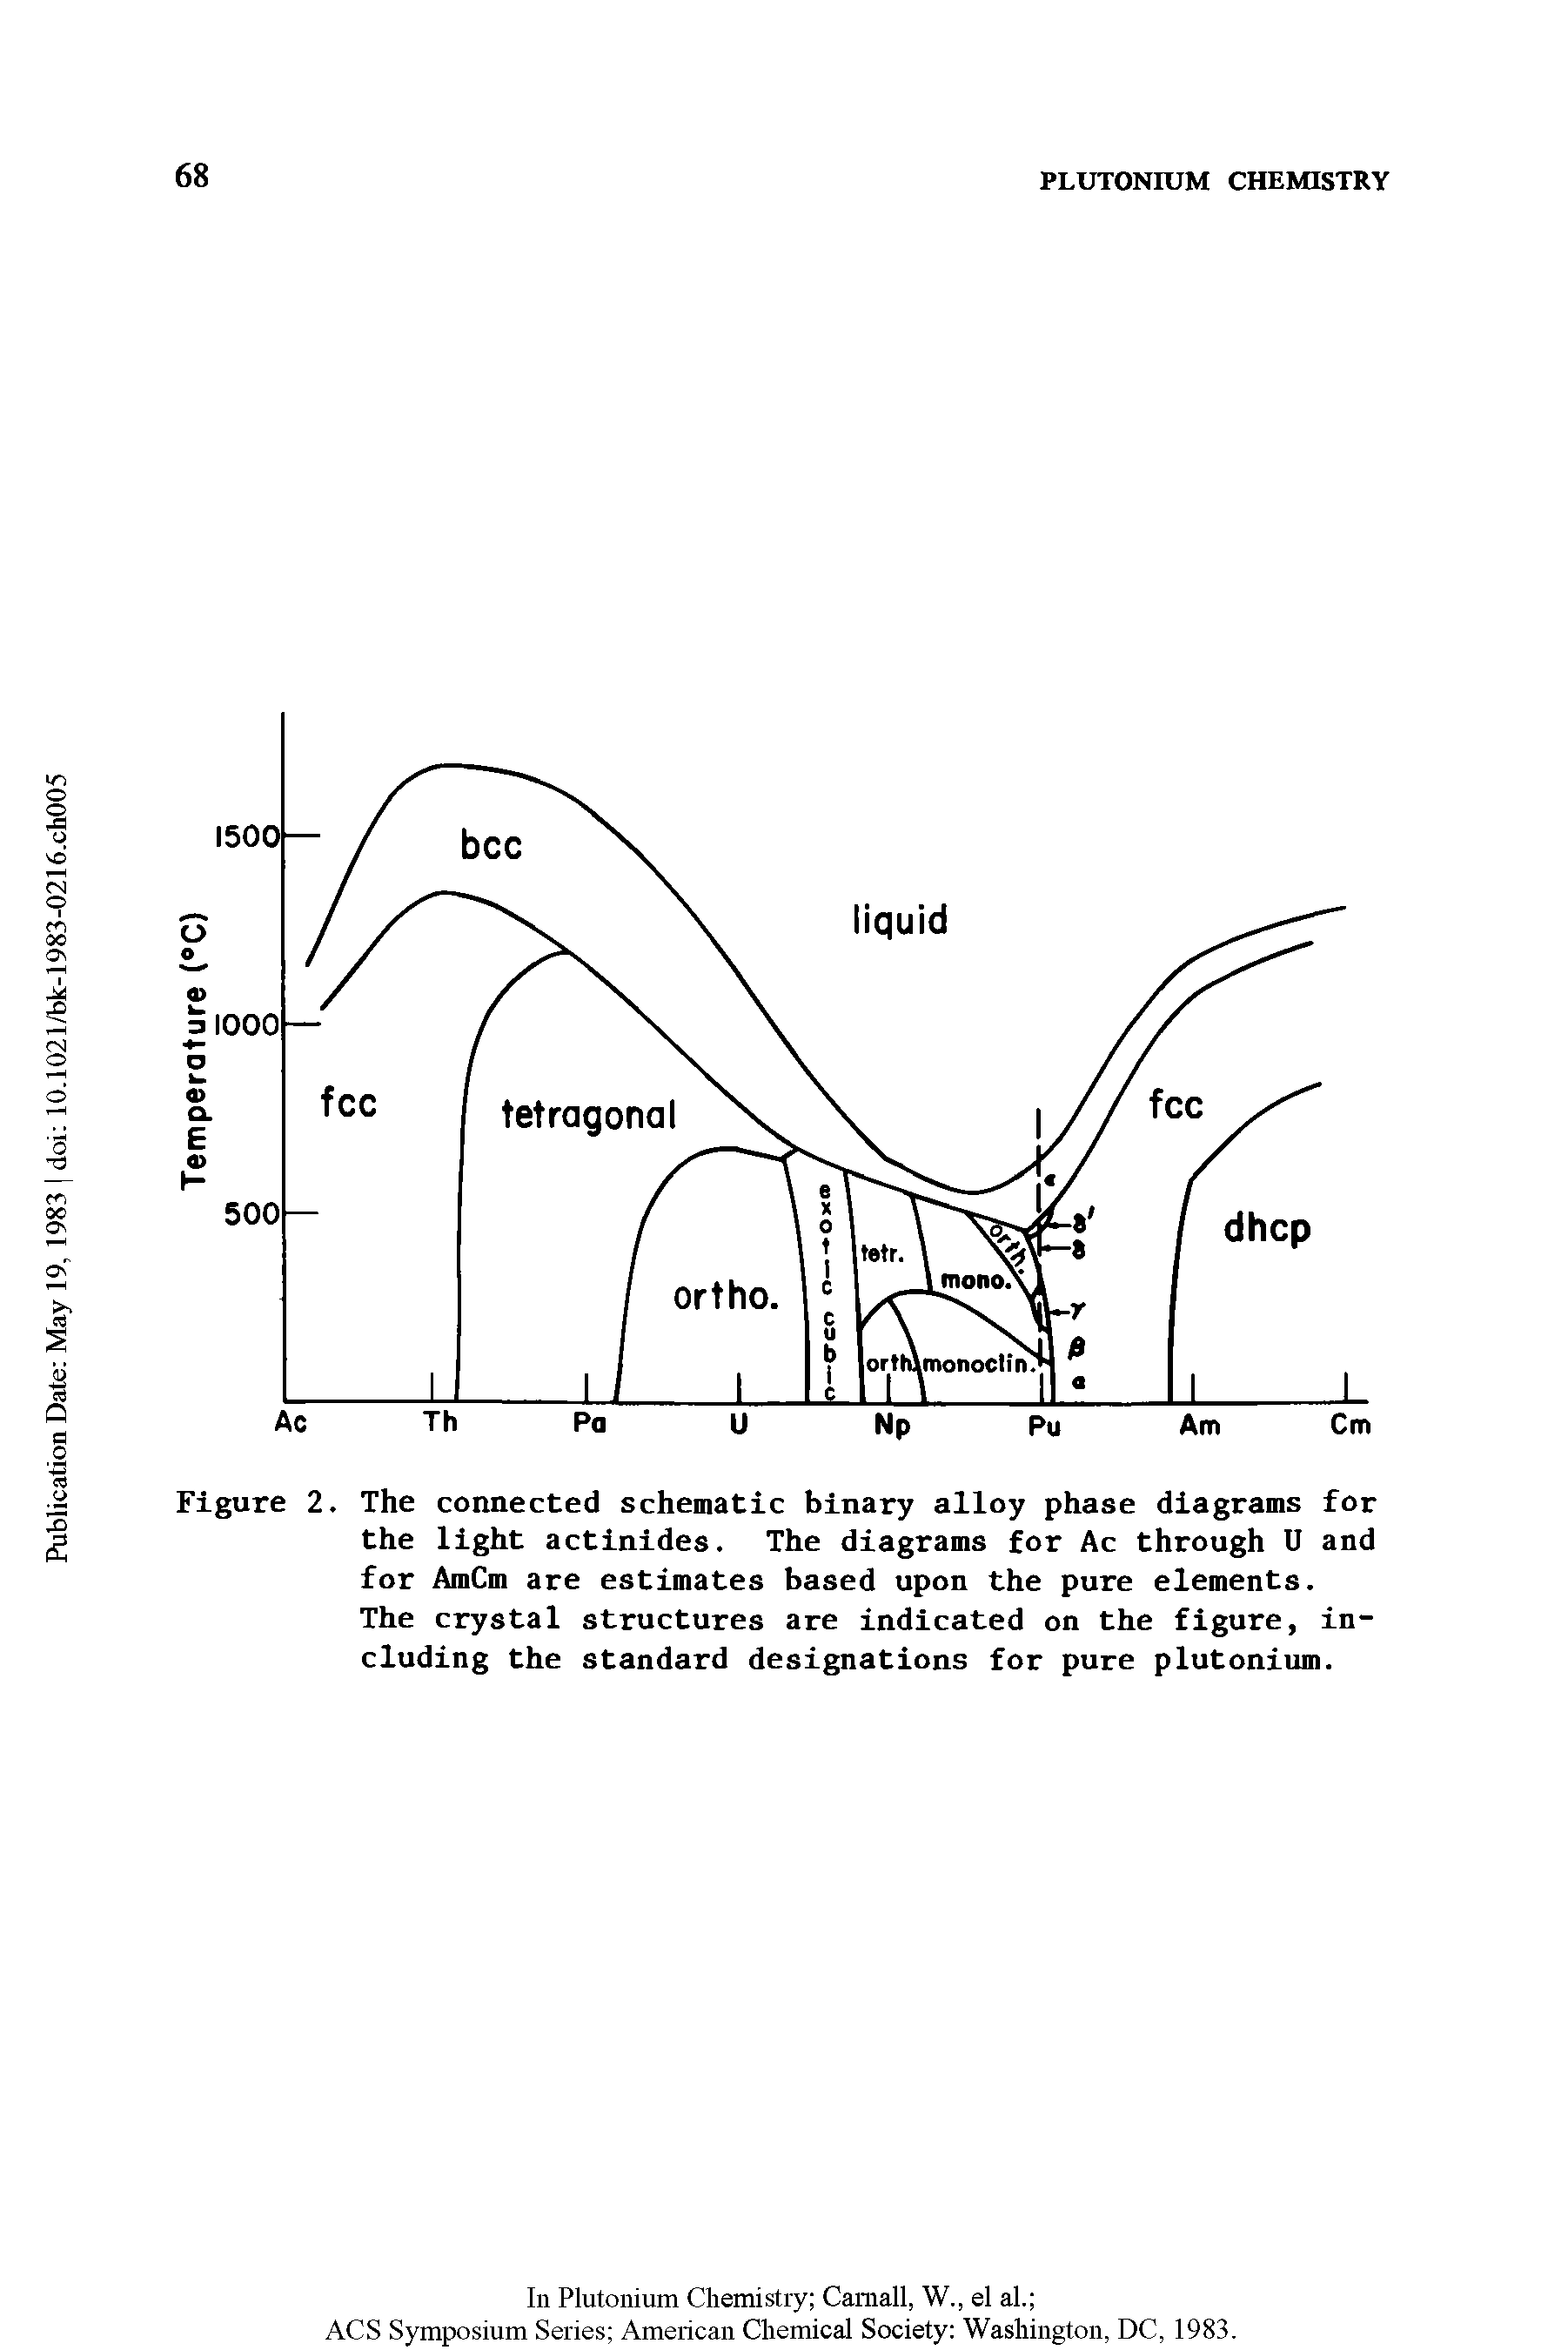 Figure 2. The connected schematic binary alloy phase diagrams for the light actinides. The diagrams for Ac through U and for AmCm are estimates based upon the pure elements.